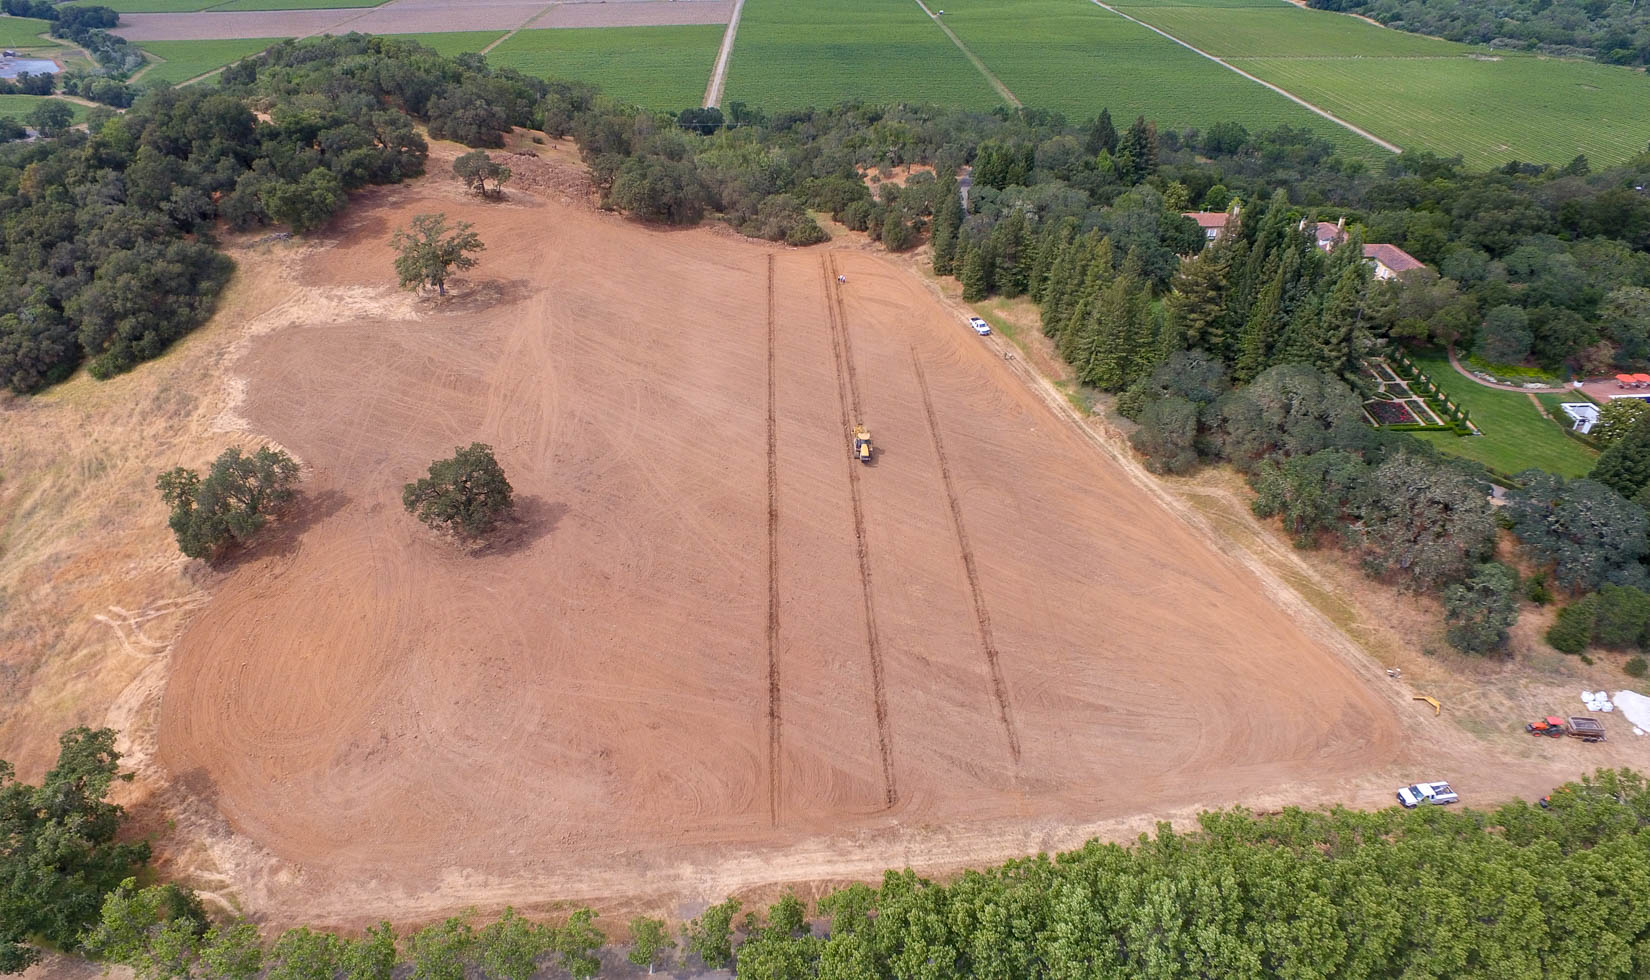 Aerial view of a tractor deep ripping vineyard soils for new Chateau Block at Jordan Winery. The dirt is shaped like a baseball field surrounded by trees.